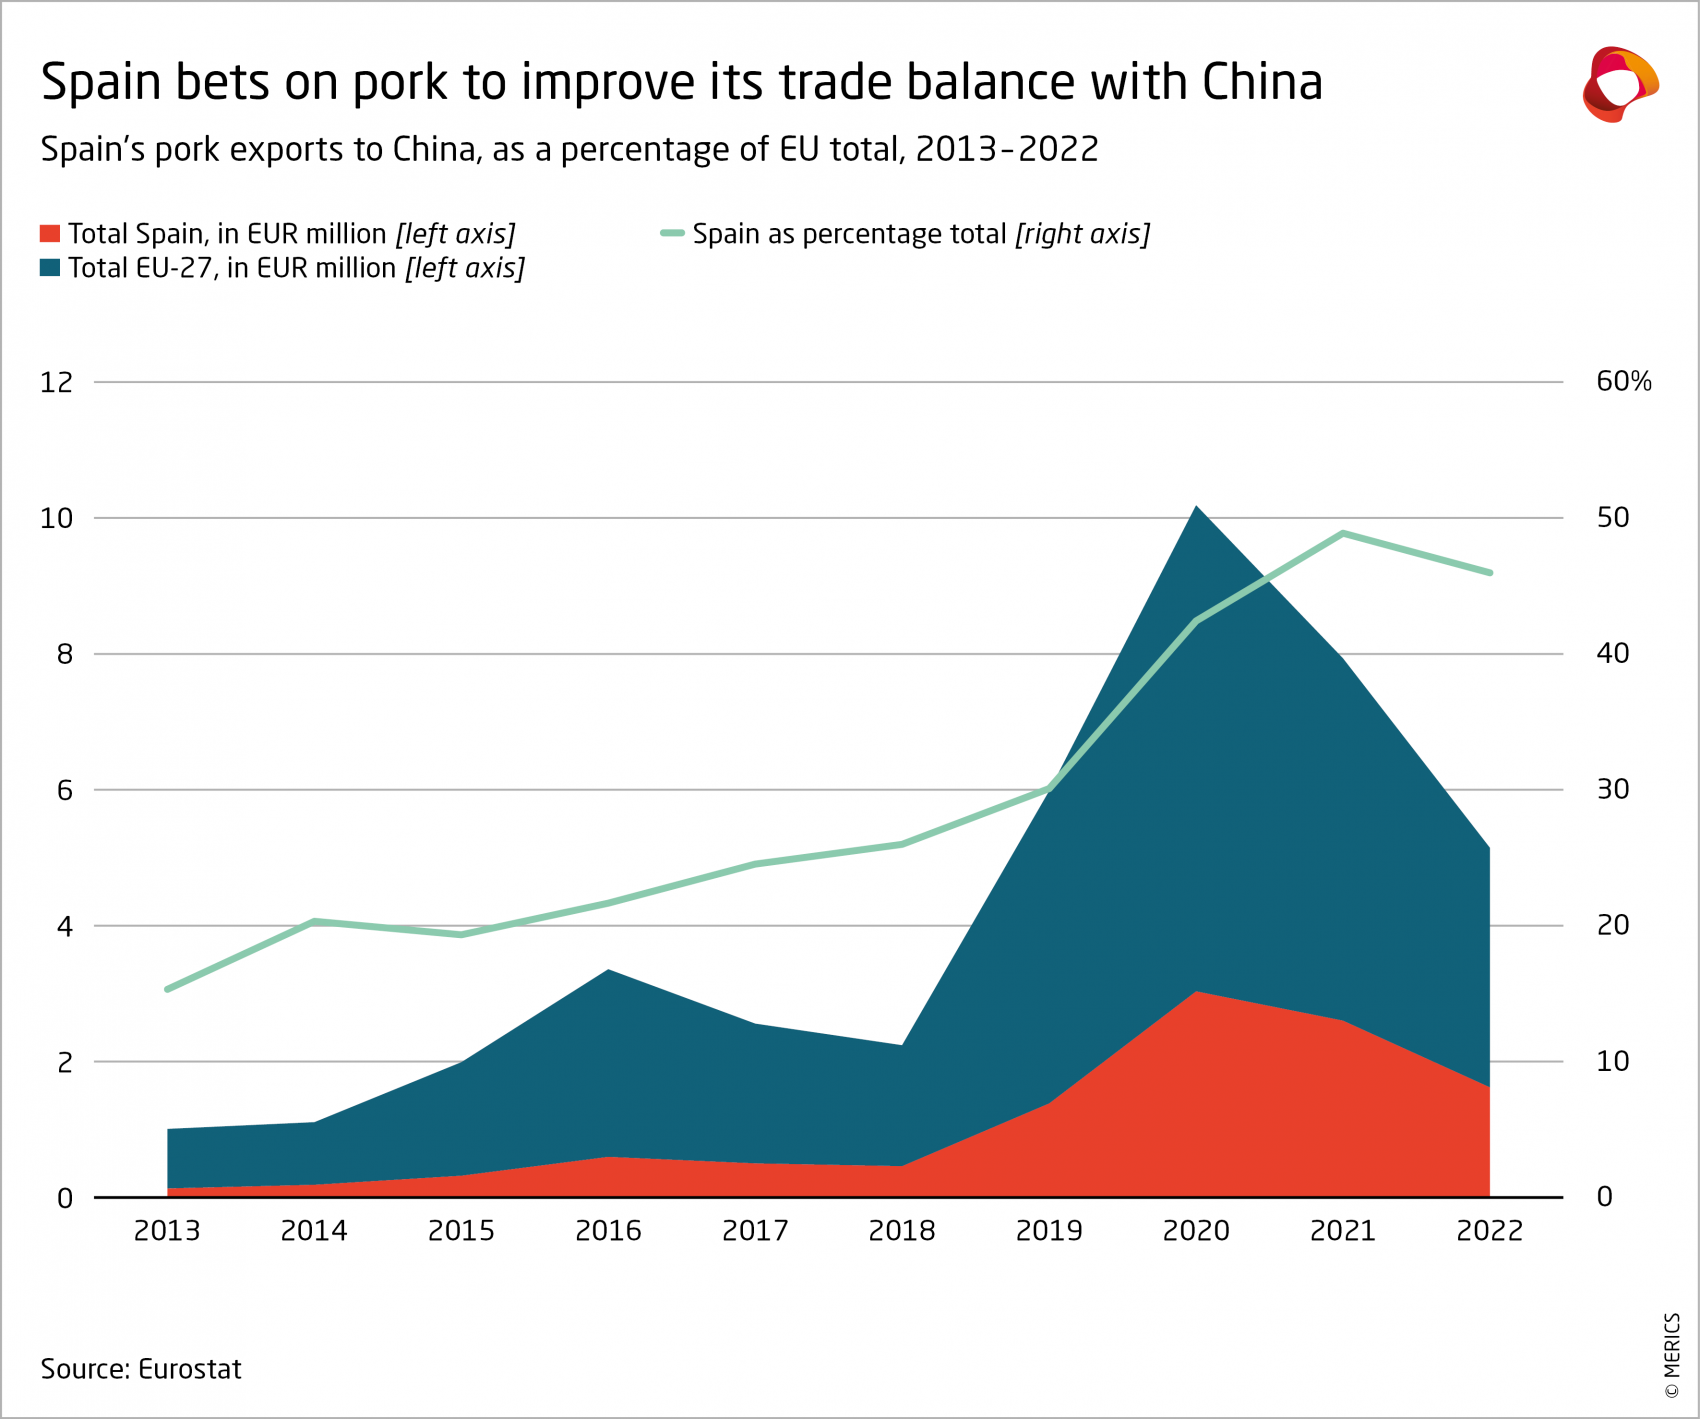 Spain's pork exports to China, 2013-2022